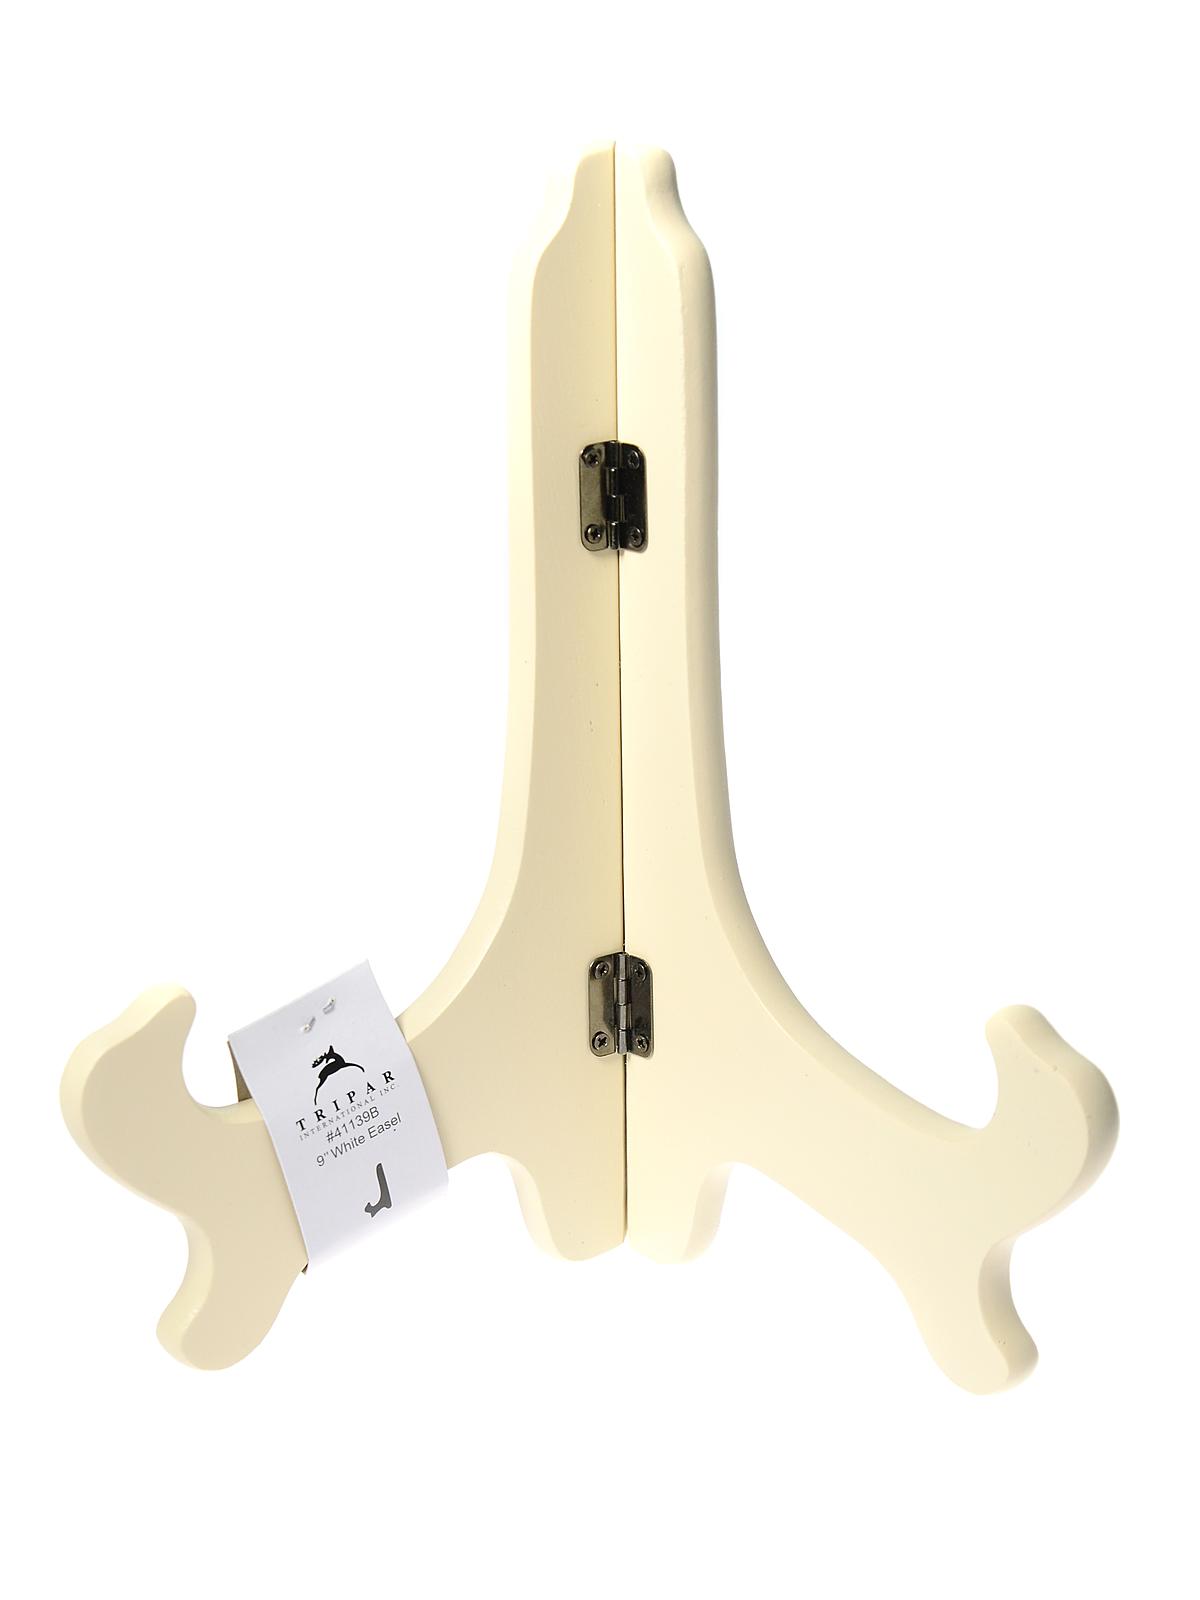 White Finish Wooden Display Stands 9 In. Each